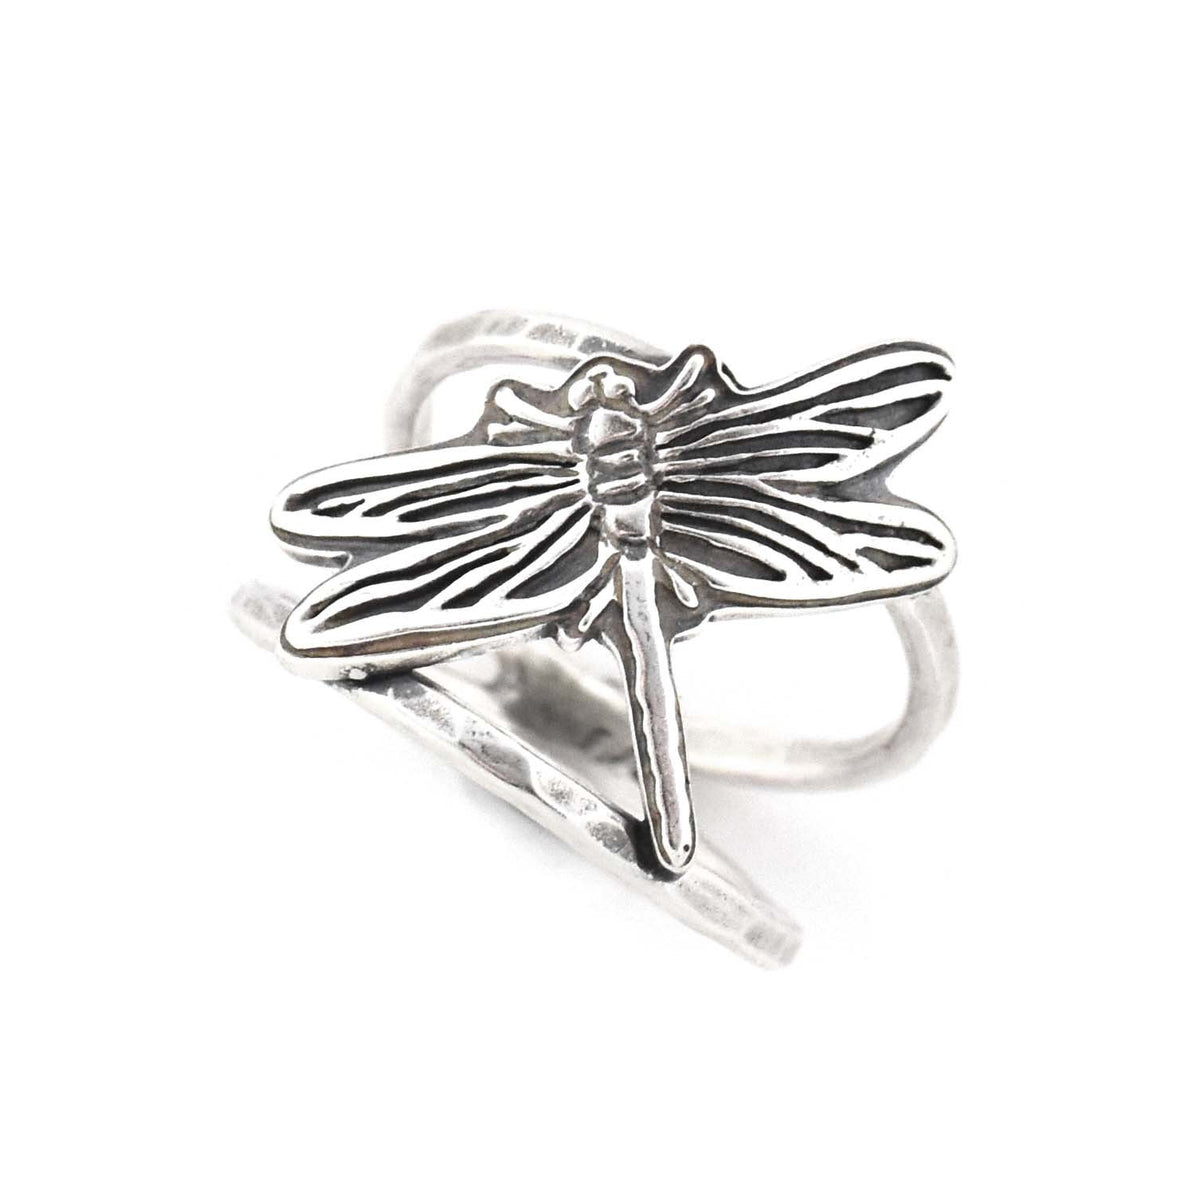 Dragonfly Ring - Ring Select Size 4 5588 - handmade by Beth Millner Jewelry